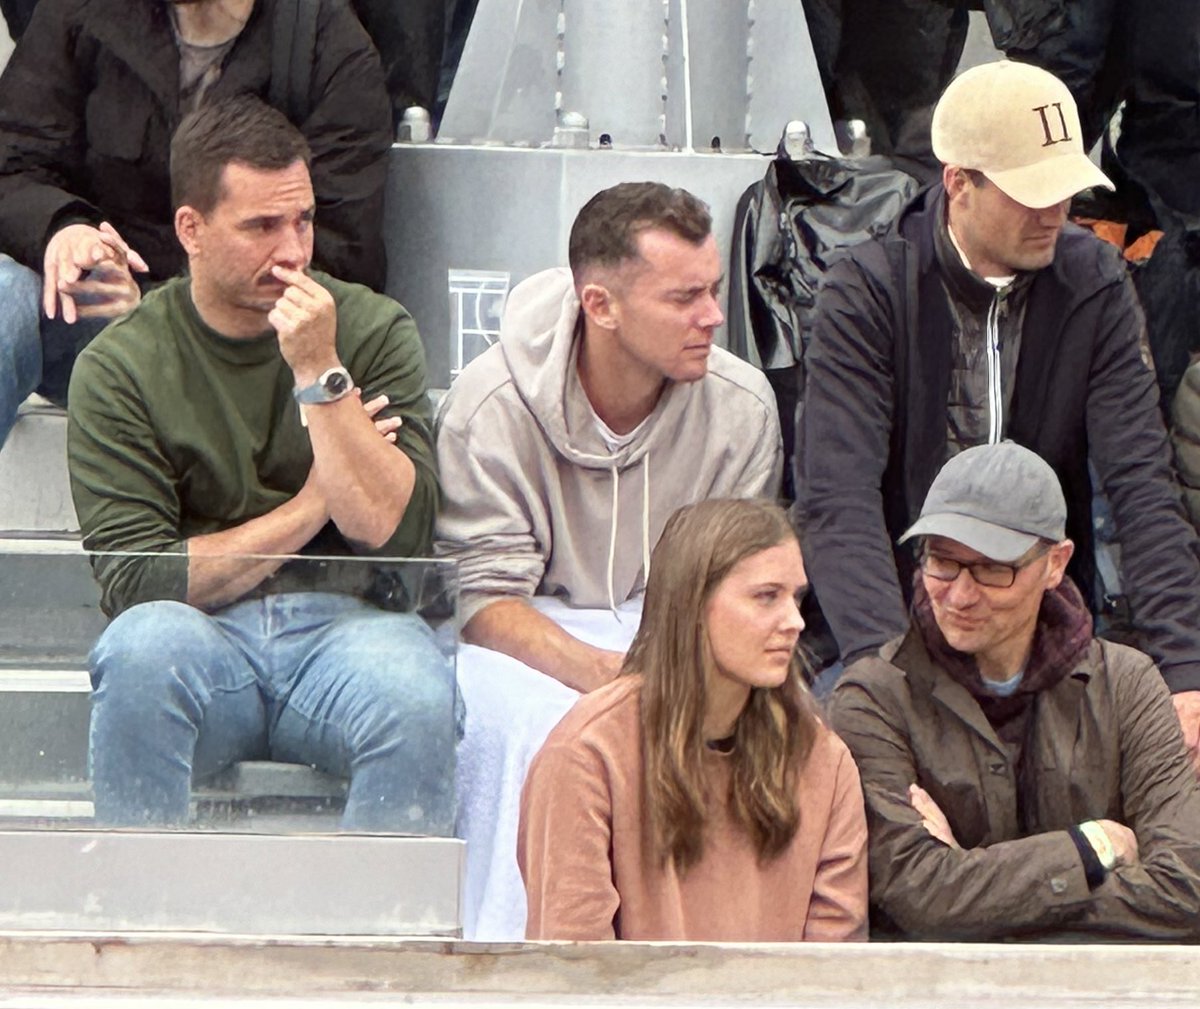 Dominik Koepfer in the stands watching Borges-Machac. 

Spotted by Borges’ girlfriend ahah.